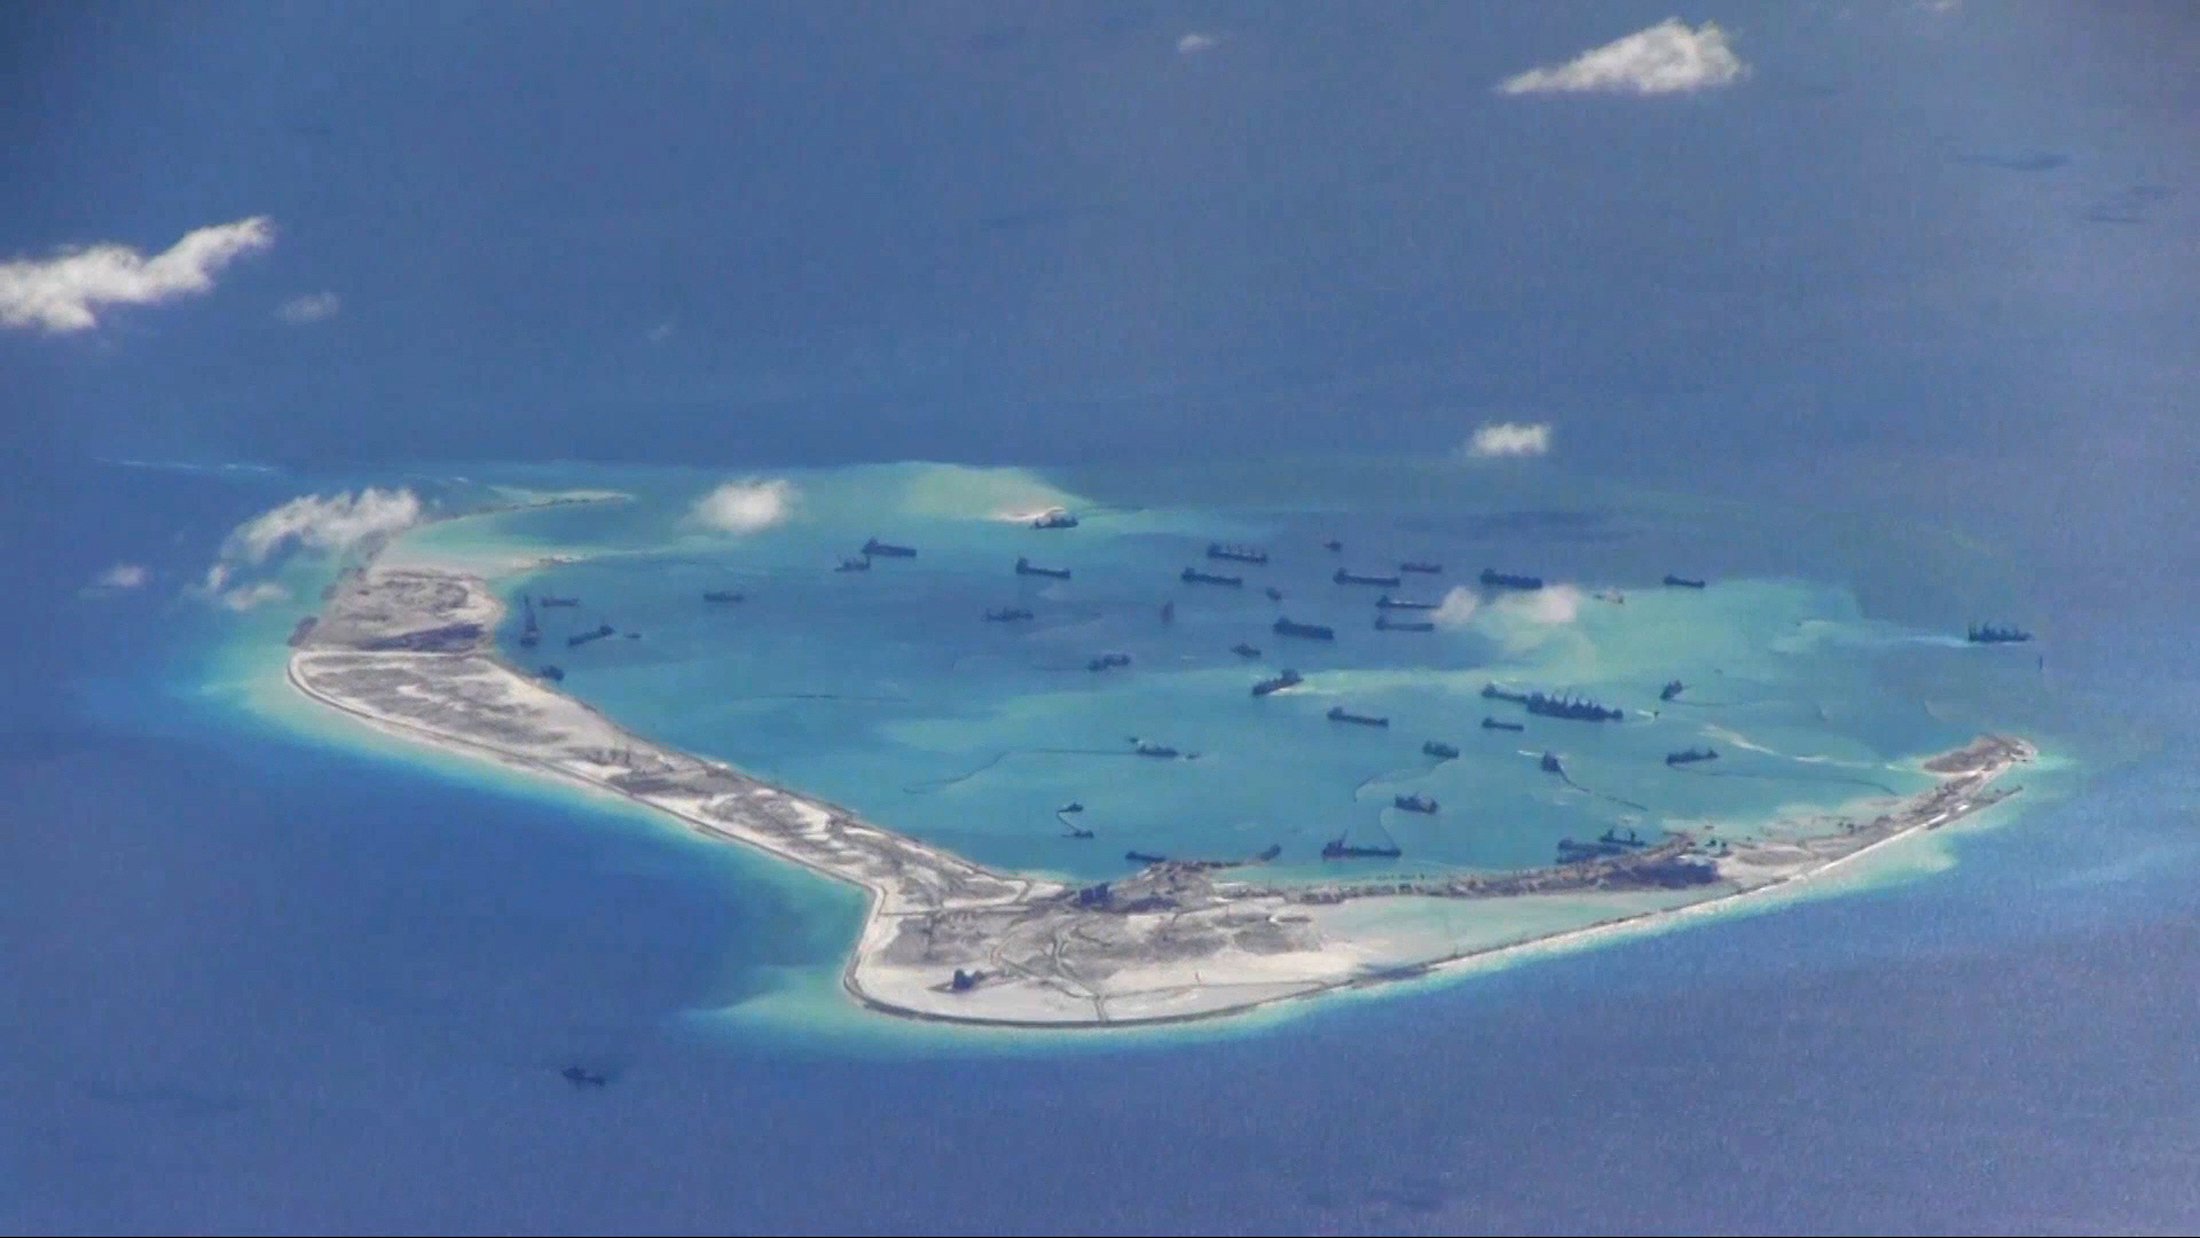 Chinese dredging vessels are seen in the waters around Mischief Reef in the disputed Spratly Islands in the South China Sea. Photo: Reuters